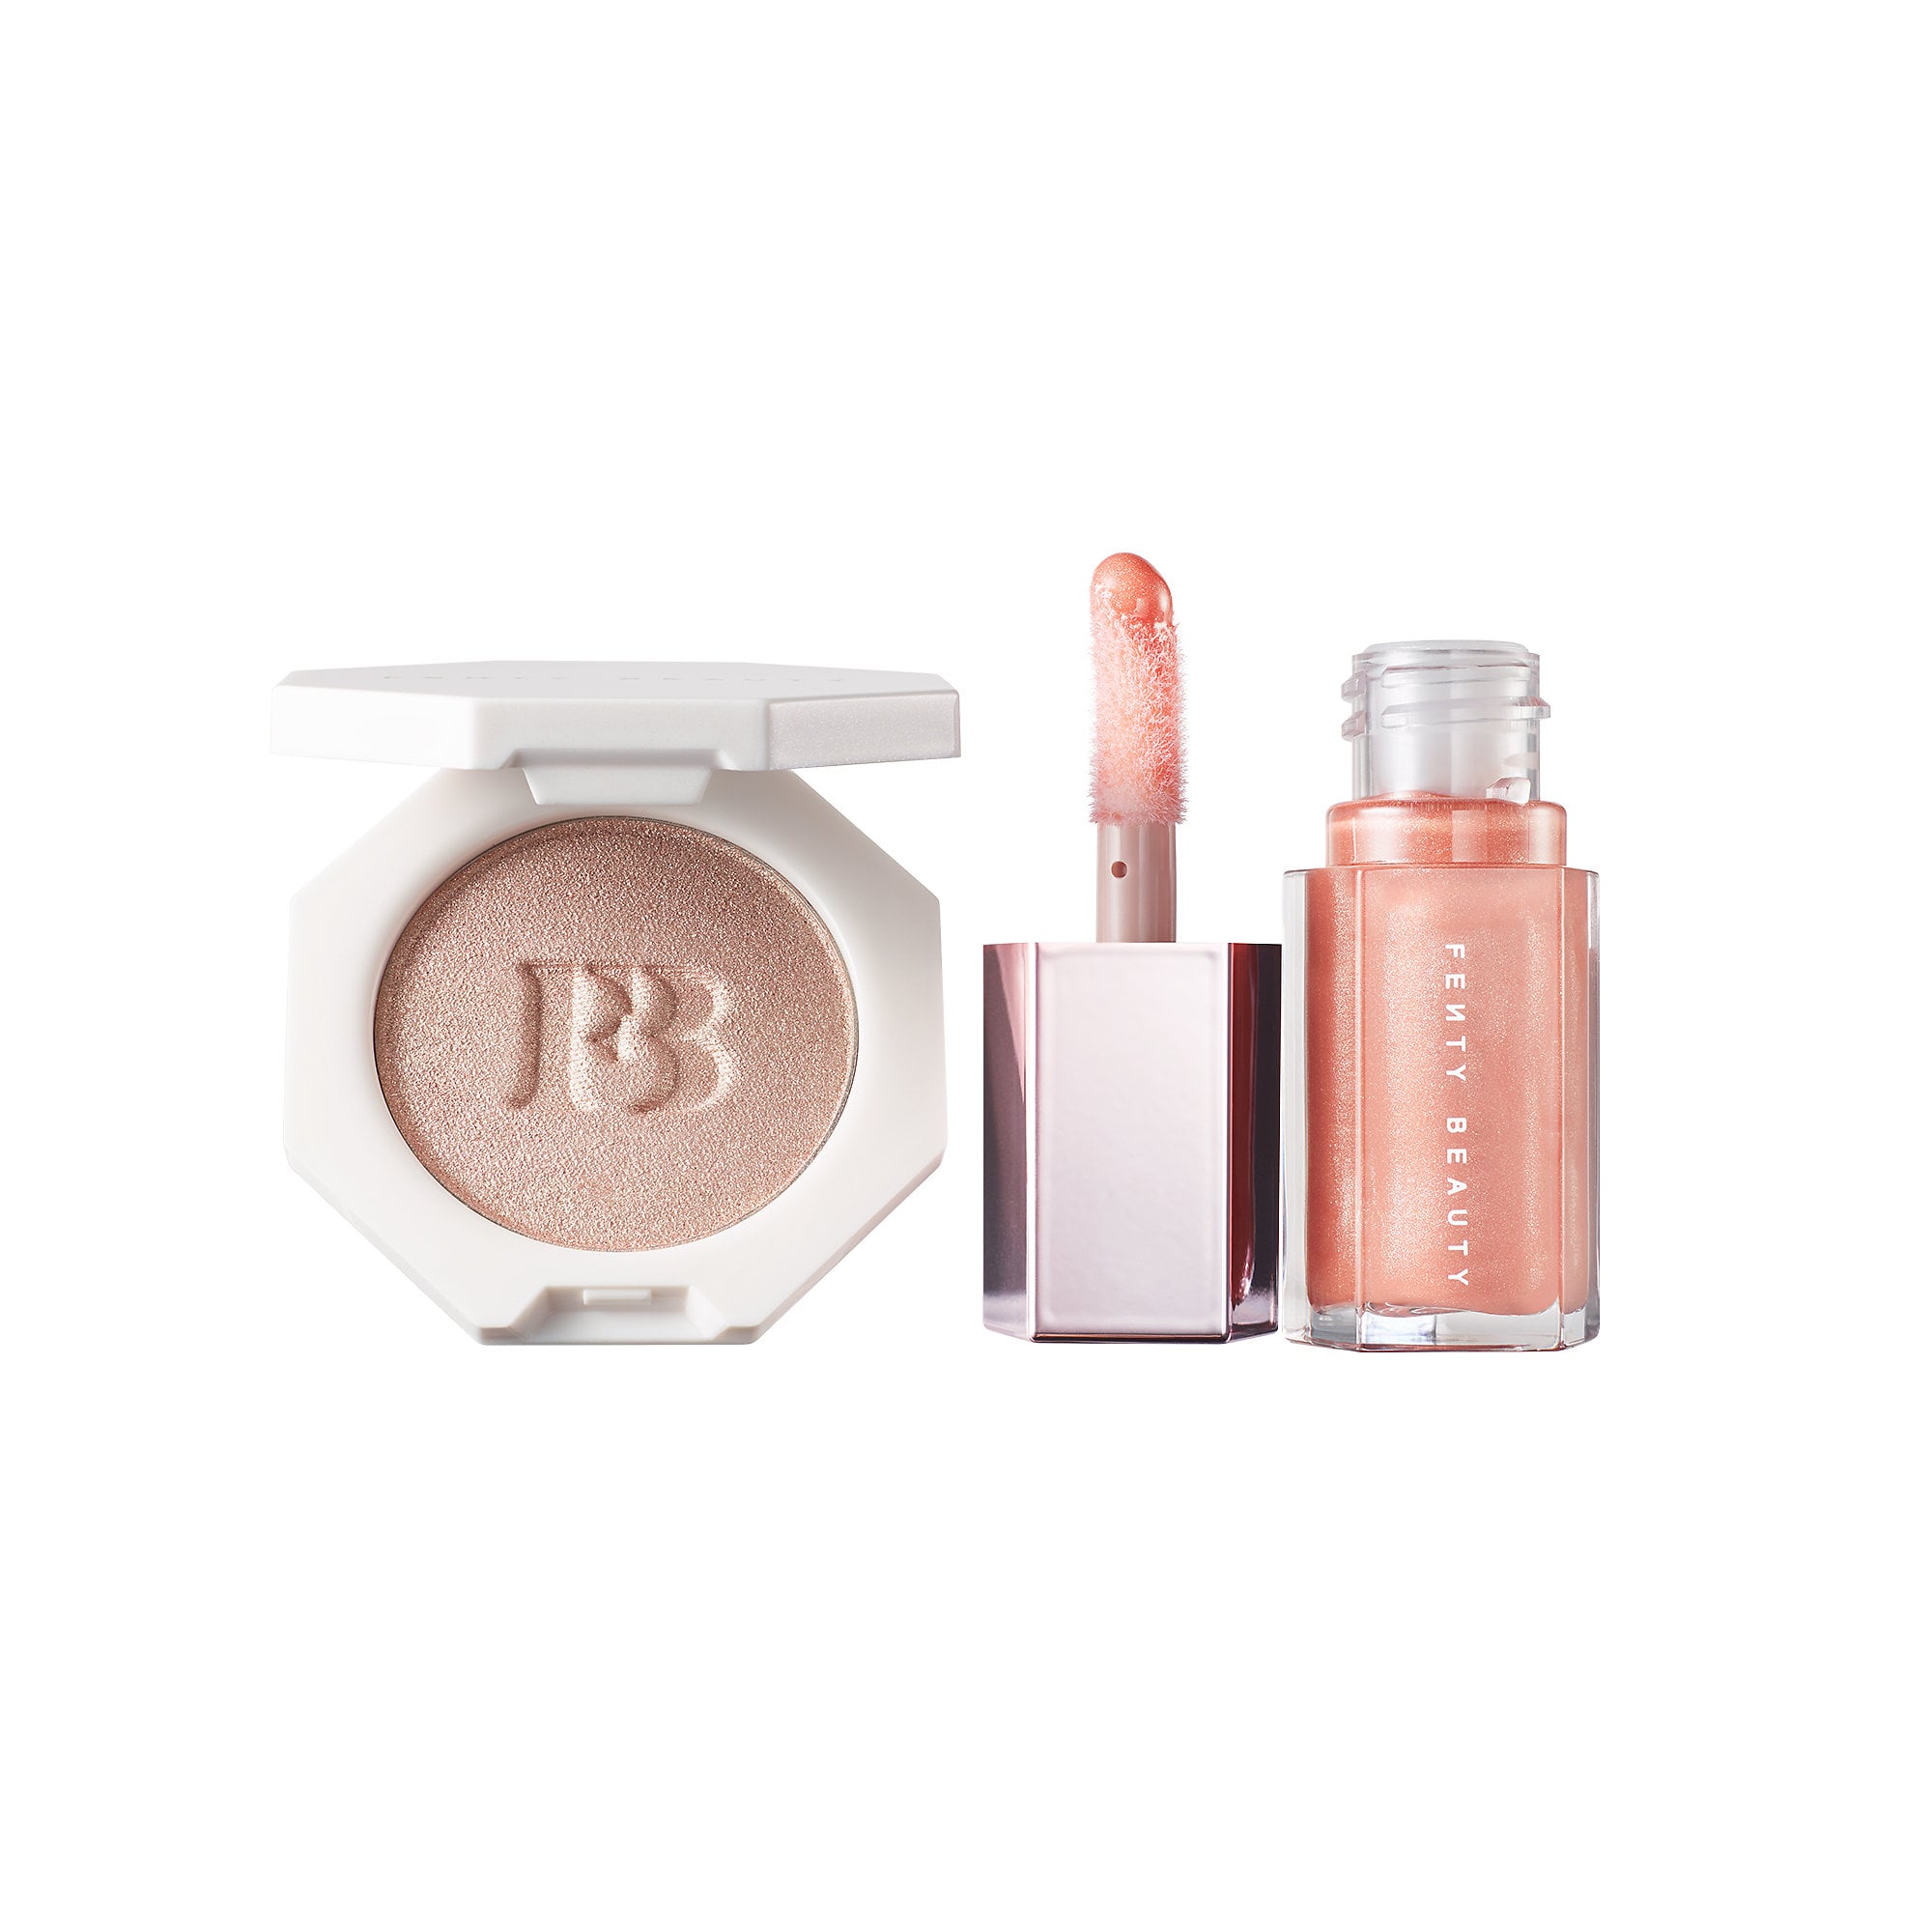 Fenty Beauty By Rihanna Bomb Baby 2 Mini Lip Gloss And Highlighter Set Great Now We Want All These Fenty Beauty Products After Reading The Sephora Reviews Popsugar Beauty Photo